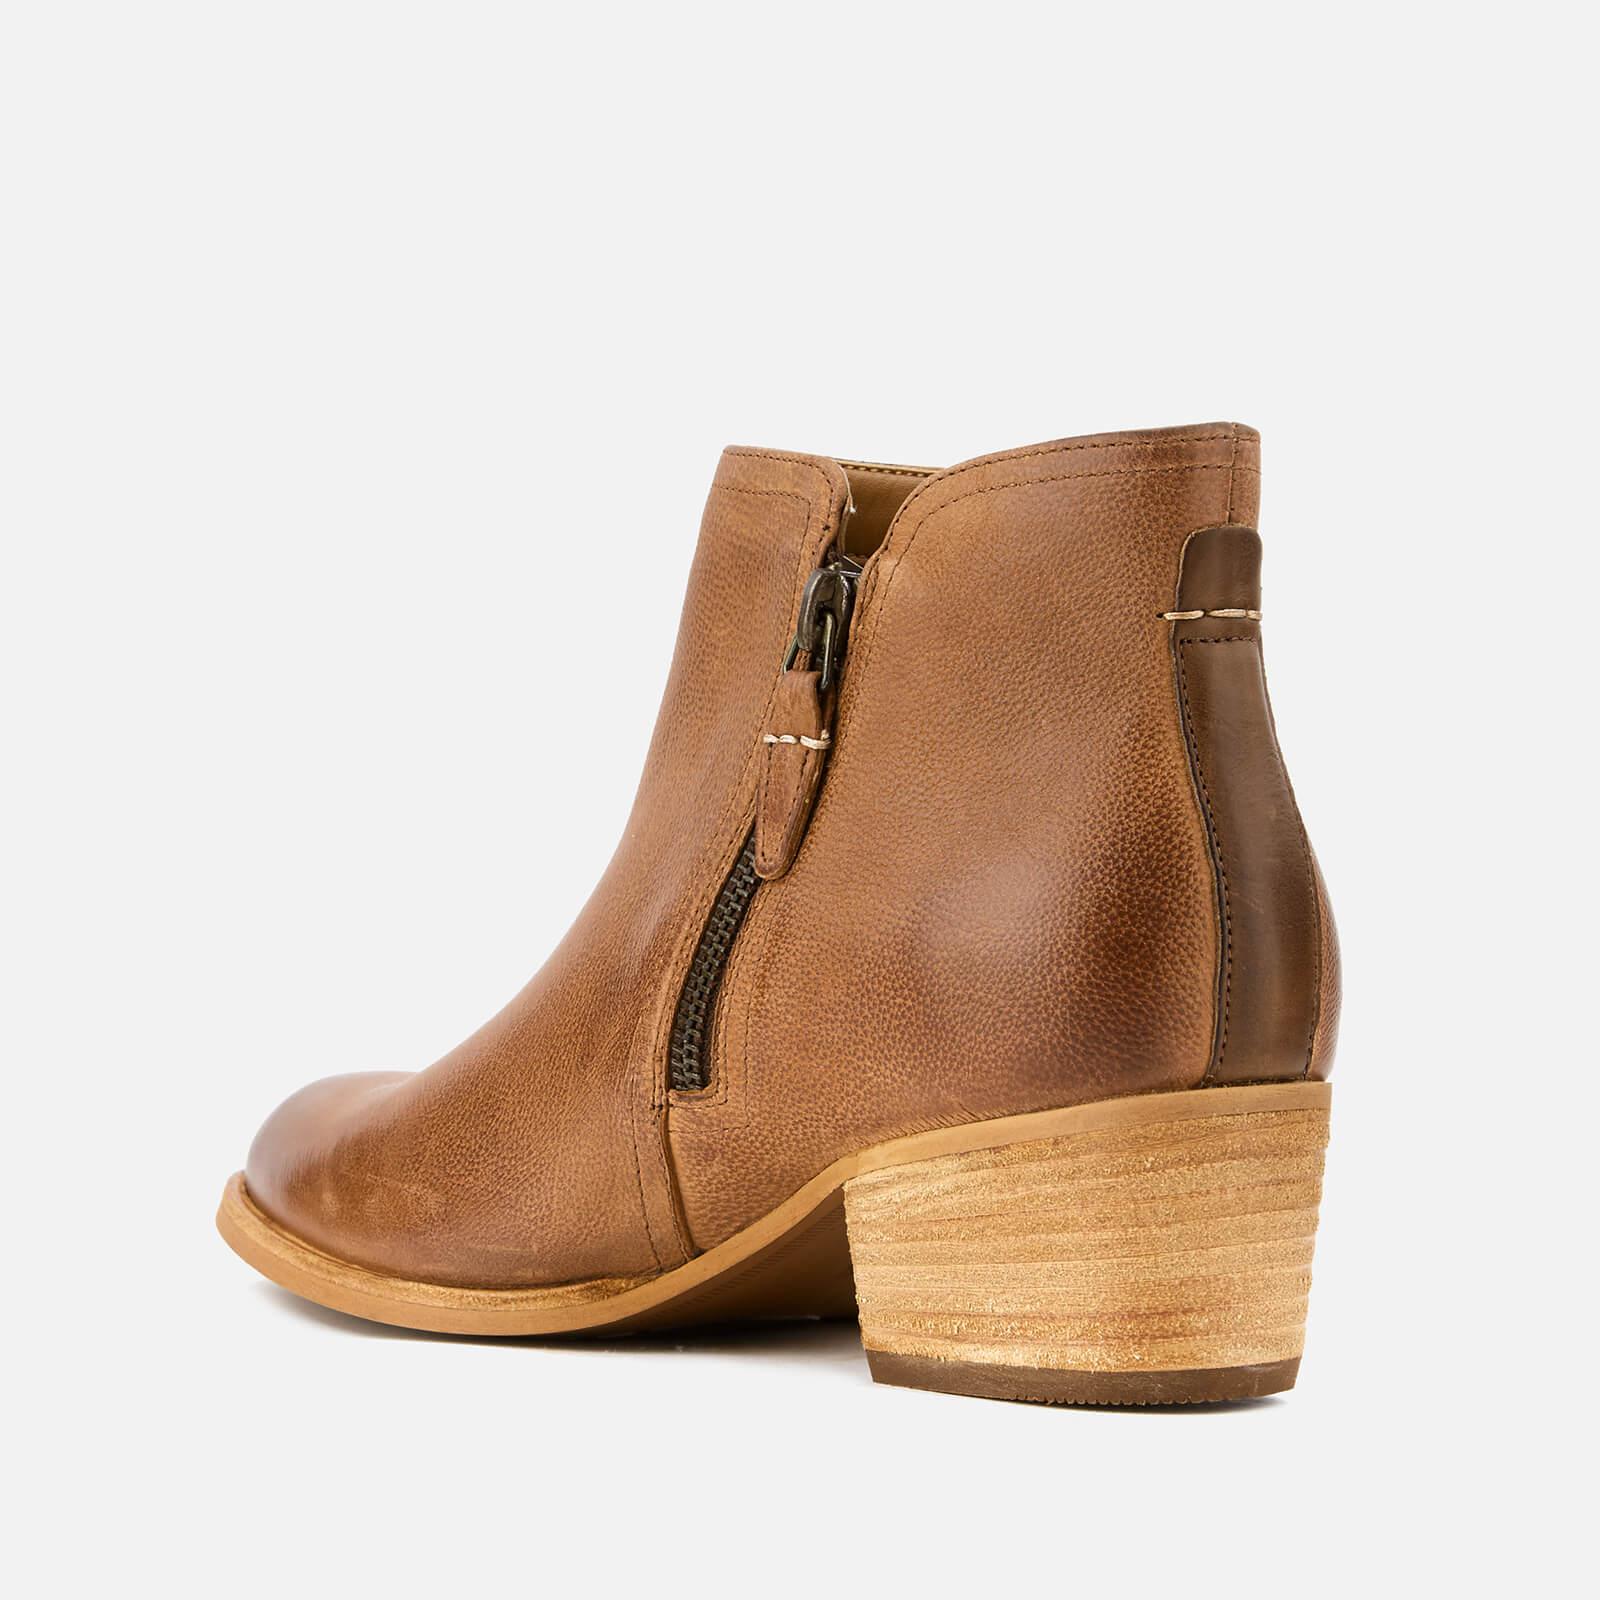 Lyst - Clarks Women's Maypearl Ramie Leather Ankle Boots in Brown